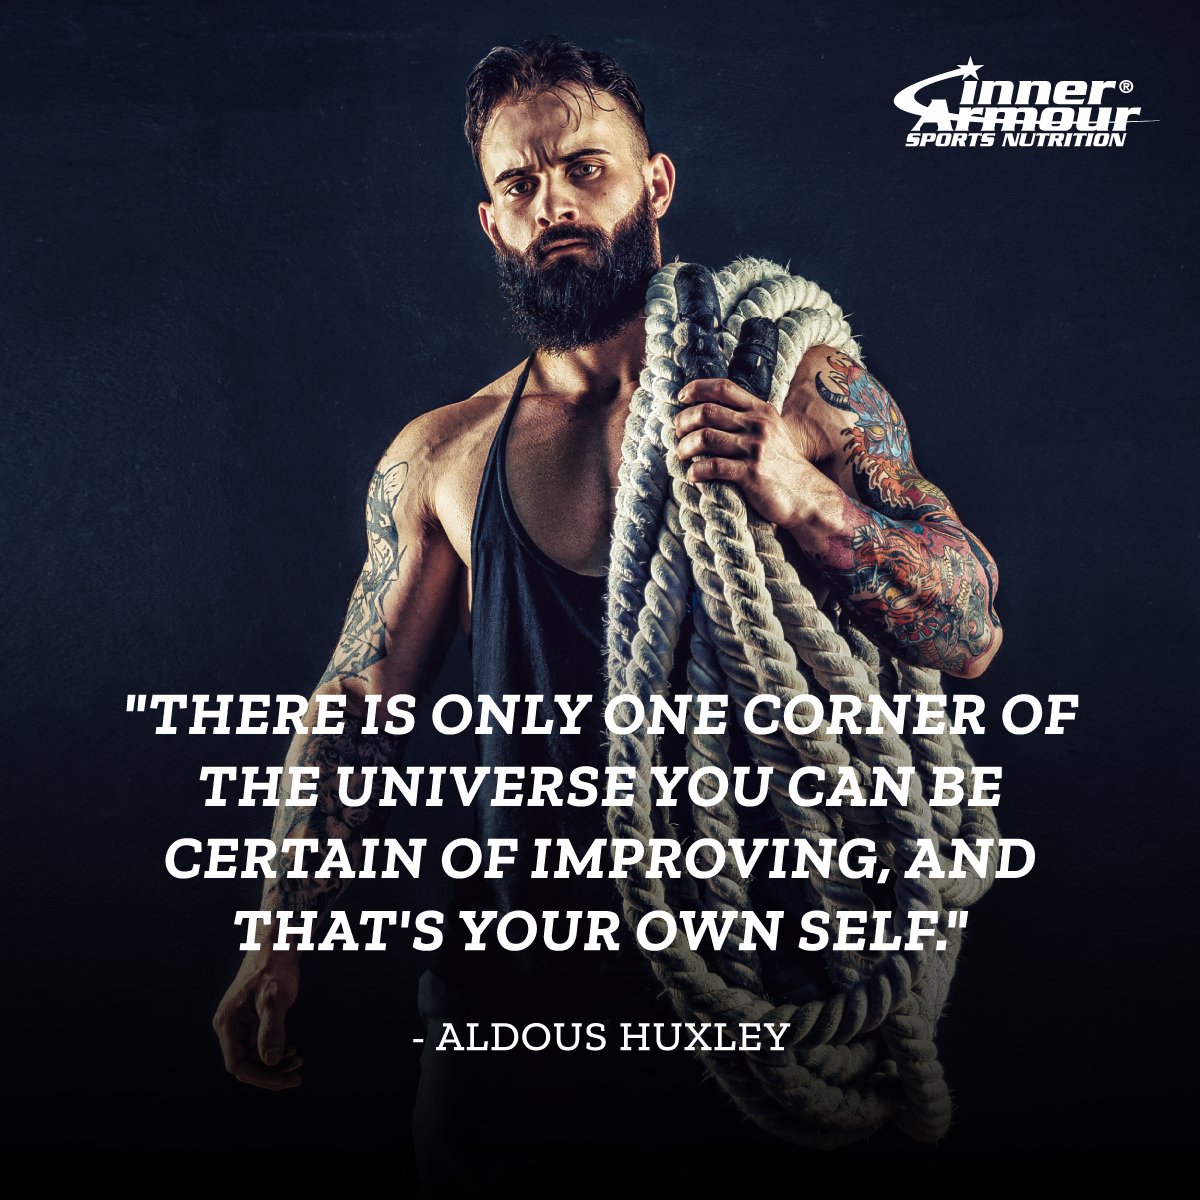 There is only one corner of the universe you can be certain of improving, and that's your own self. - Aldous Huxley #InnerArmour #StrengthFromWithin #sportsnutrition #indisputableresults